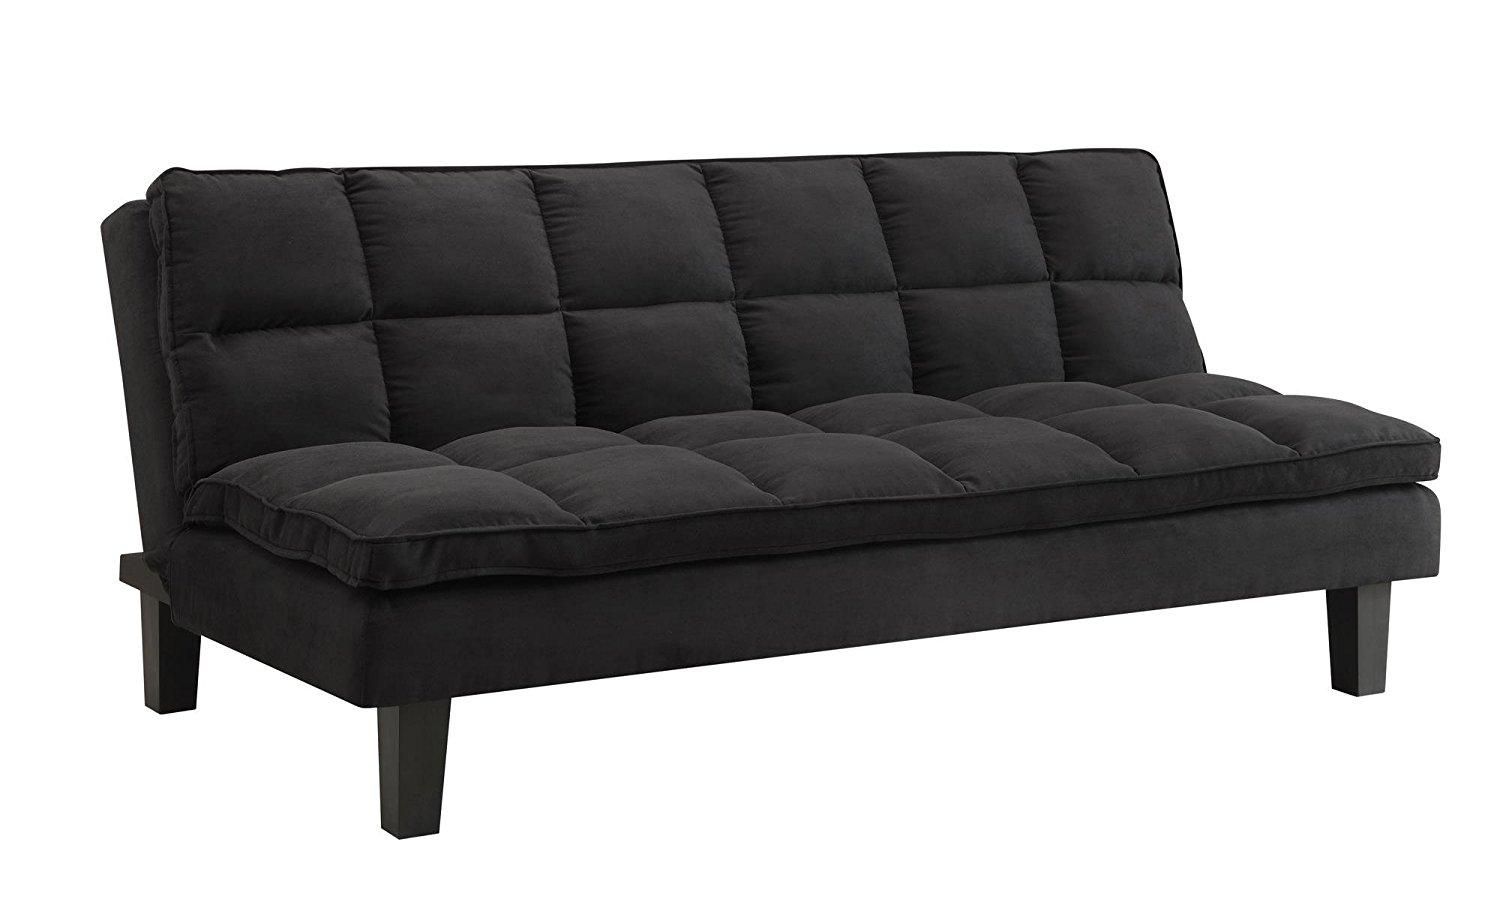 Sofas Center : Perfect Usedn Leather Sleeper Sofa For Sheets Queen Inside Sears Sleeper Sofas (View 6 of 20)